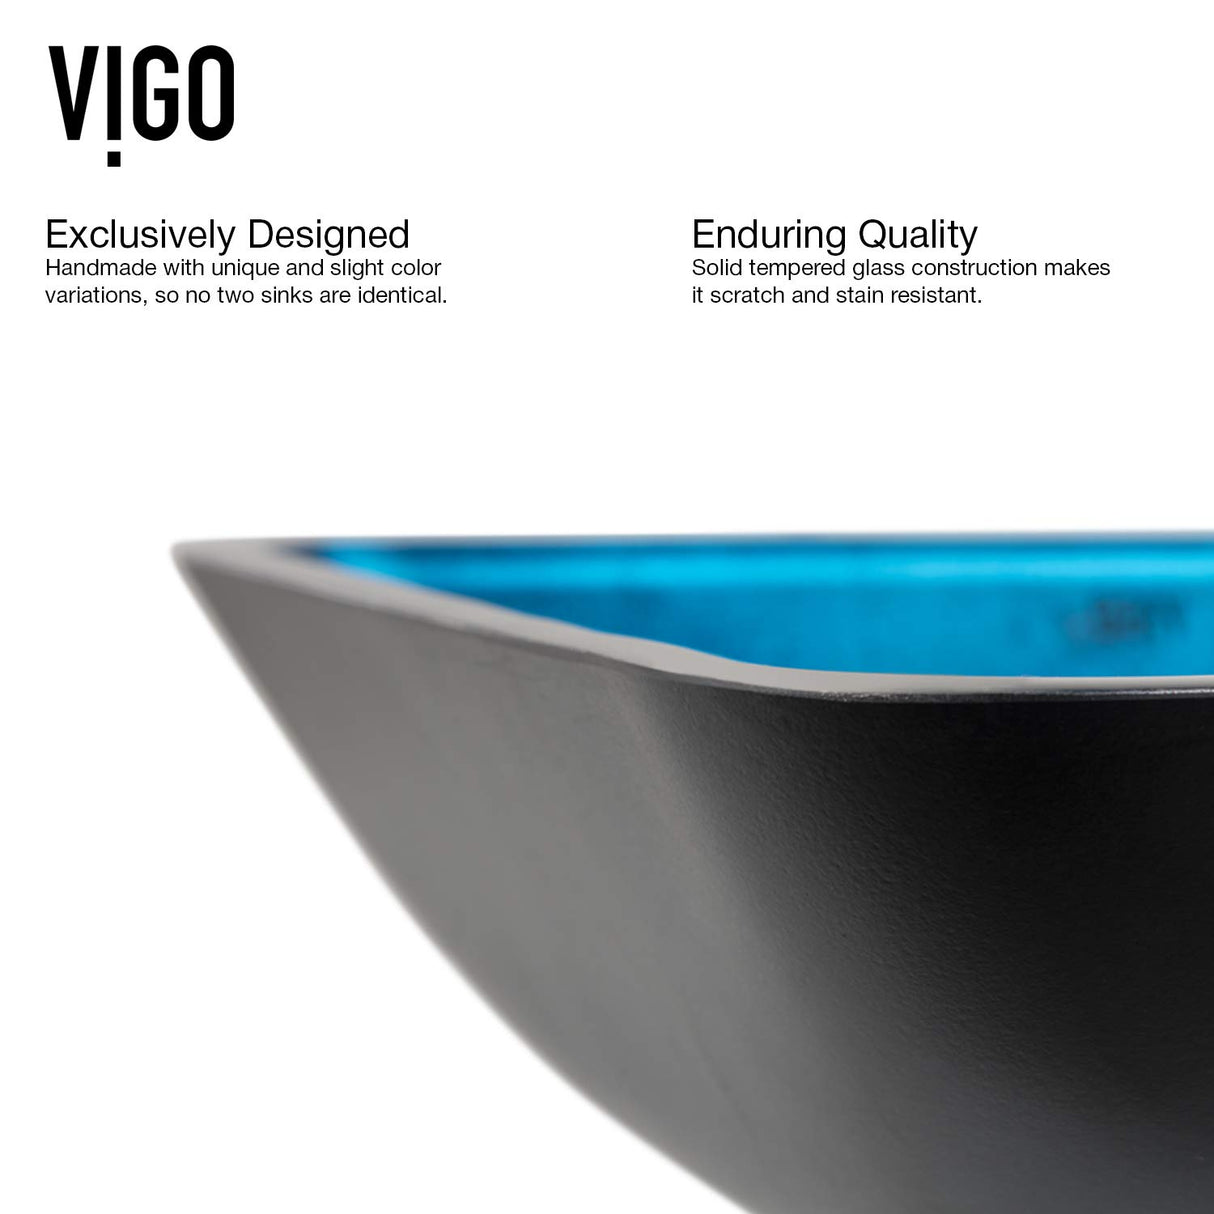 VIGO VGT1440 18.125" L -13.0" W -10.25" H Handmade Countertop Glass Rectangular Vessel Bathroom Sink Set in Turquoise Finish with cFiber Brushed Nickel Single-Handle Faucet and Pop Up Drain